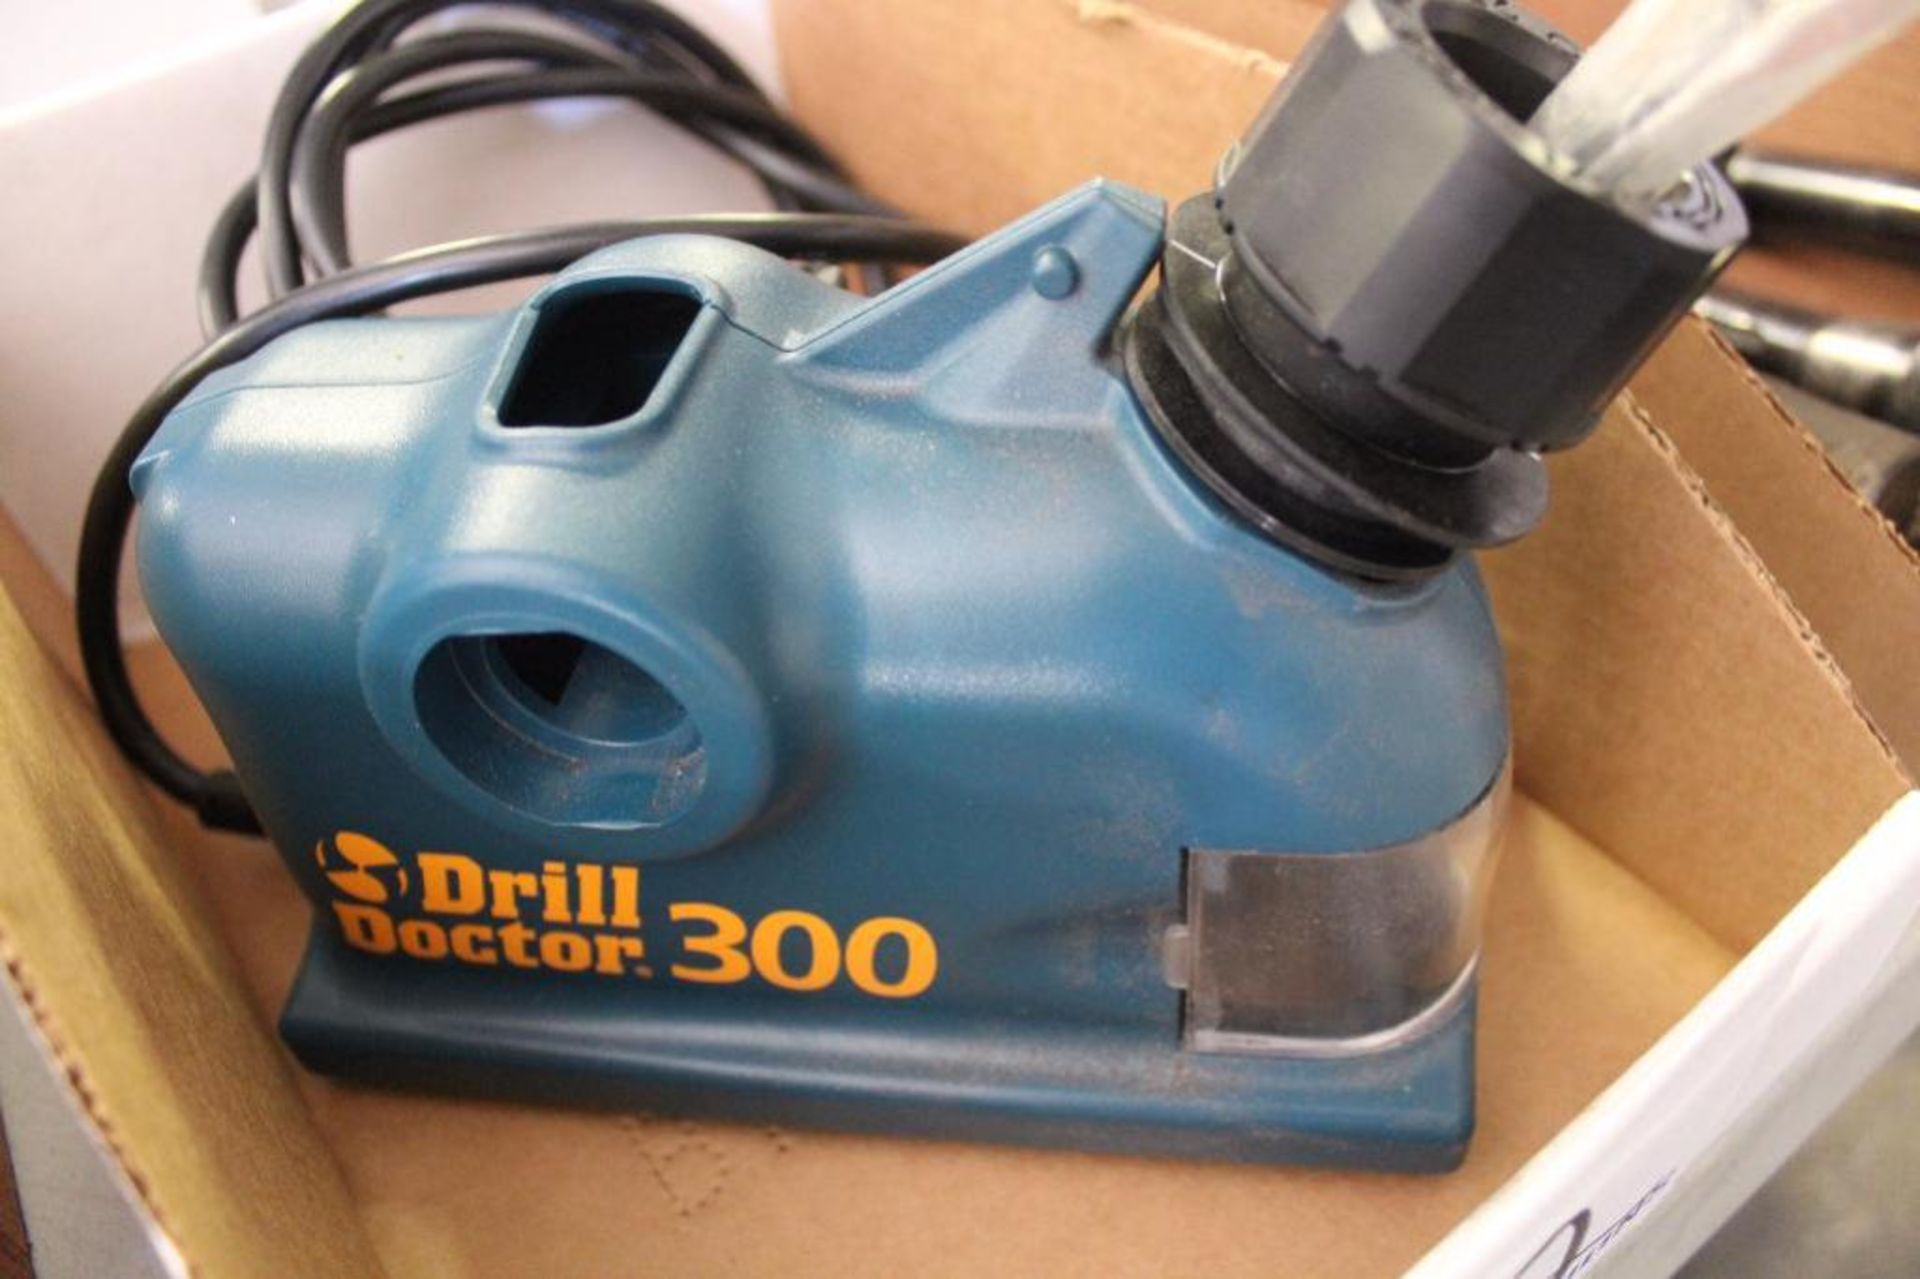 Drill Doctor 300 drill sharpener - Image 2 of 2